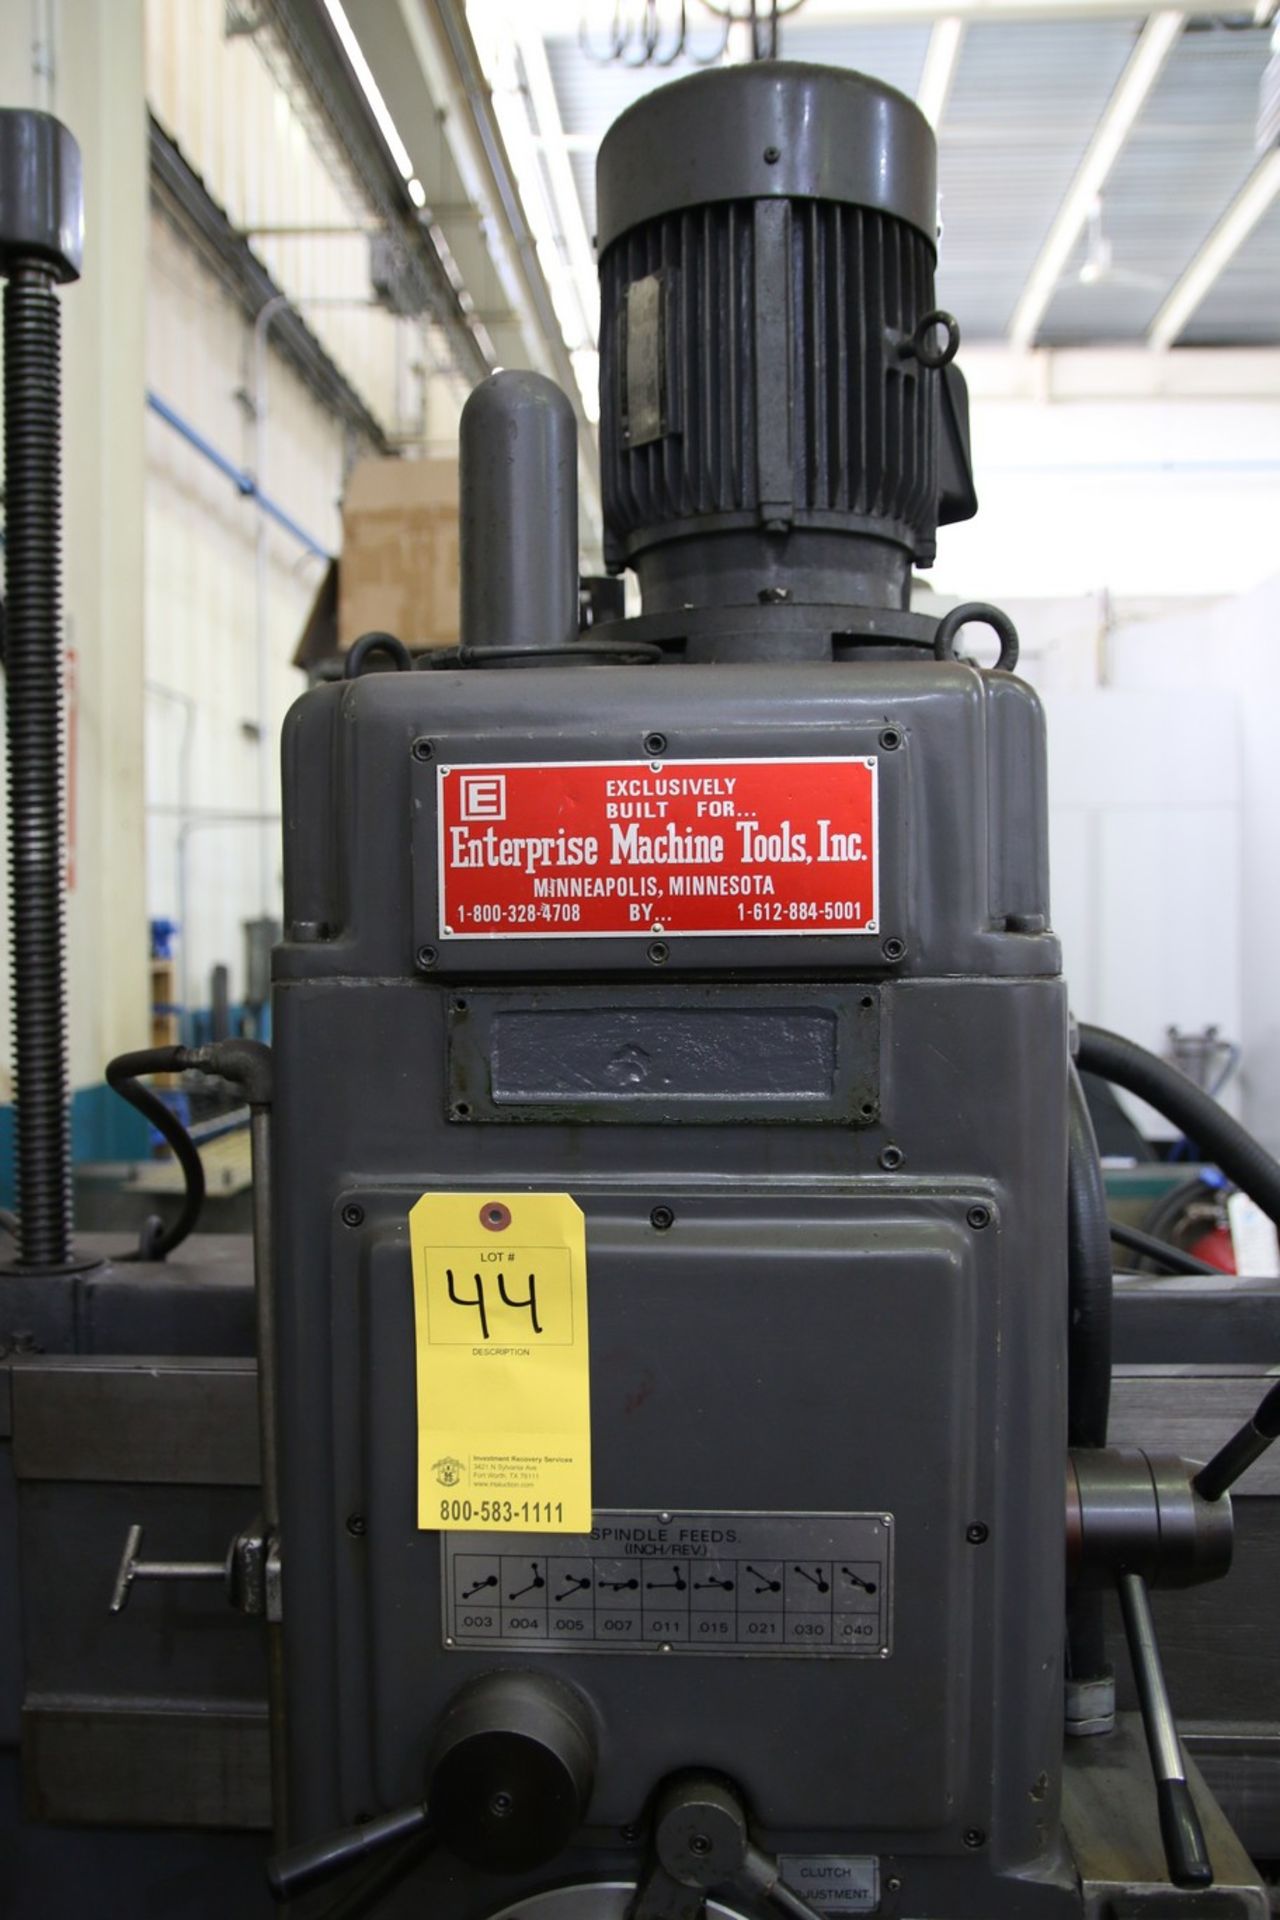 Ikeda RM-1575 Ikeda RM-1575 Radial Drilling Machine Includes T-Slot Box Table - Image 8 of 10